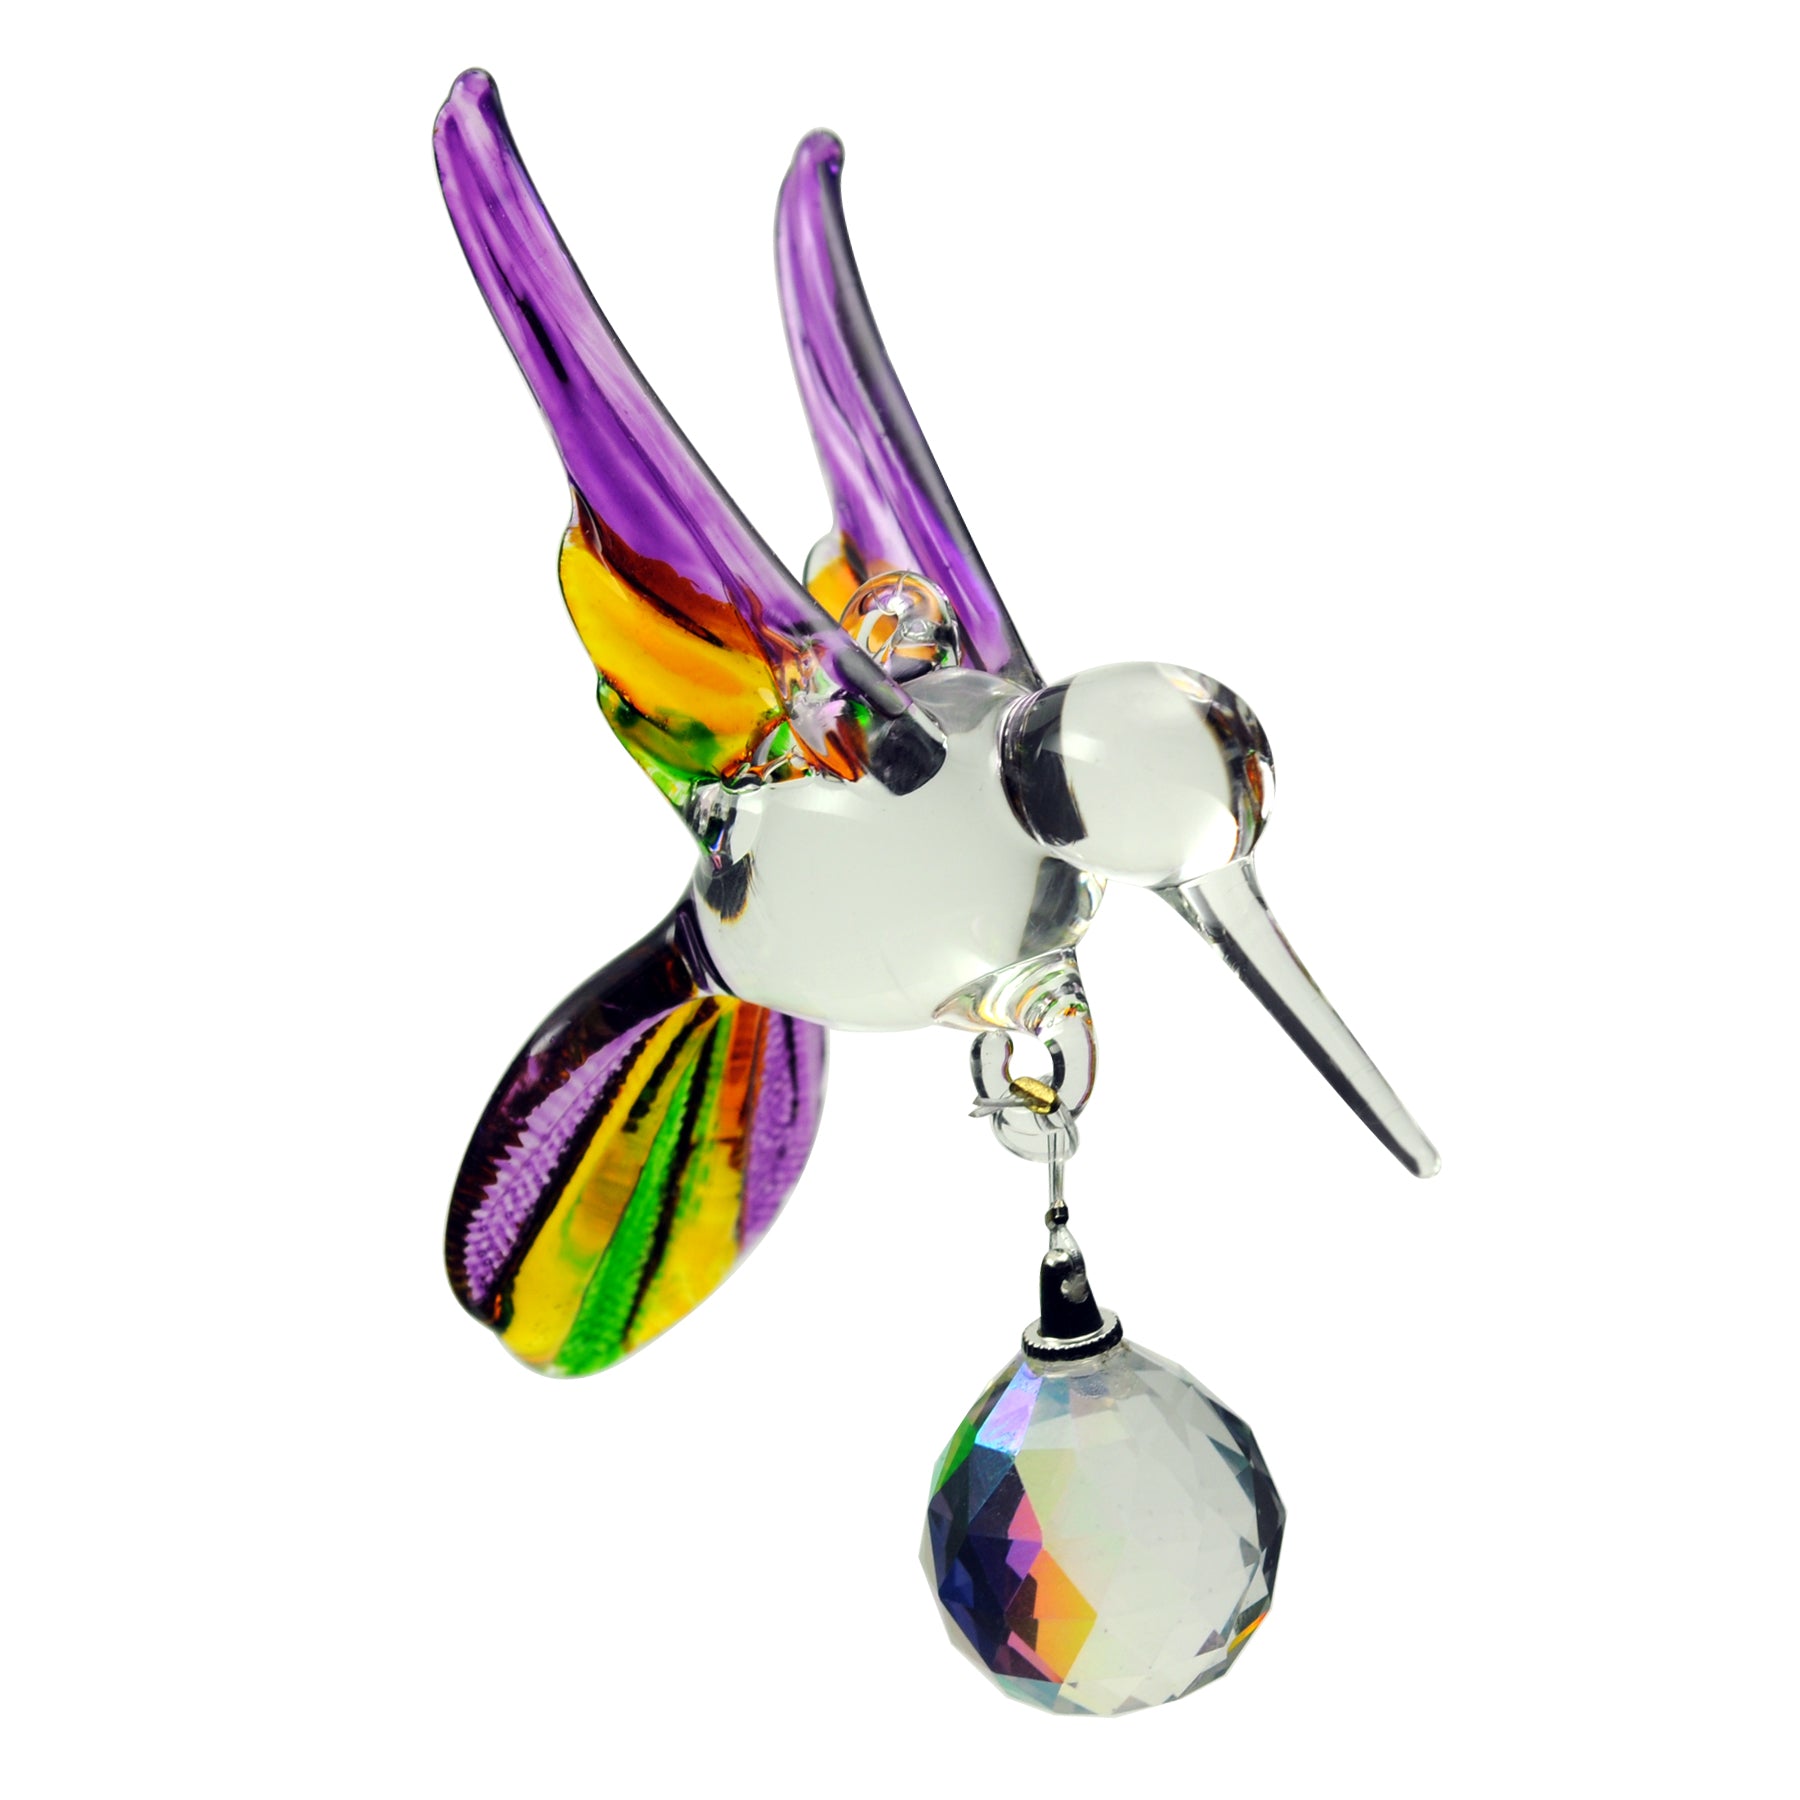 Crystal Castle Glass Multi-Colored Hummingbird ornament in Purple with Yellow and Green accents and a small crystal ball ornament.